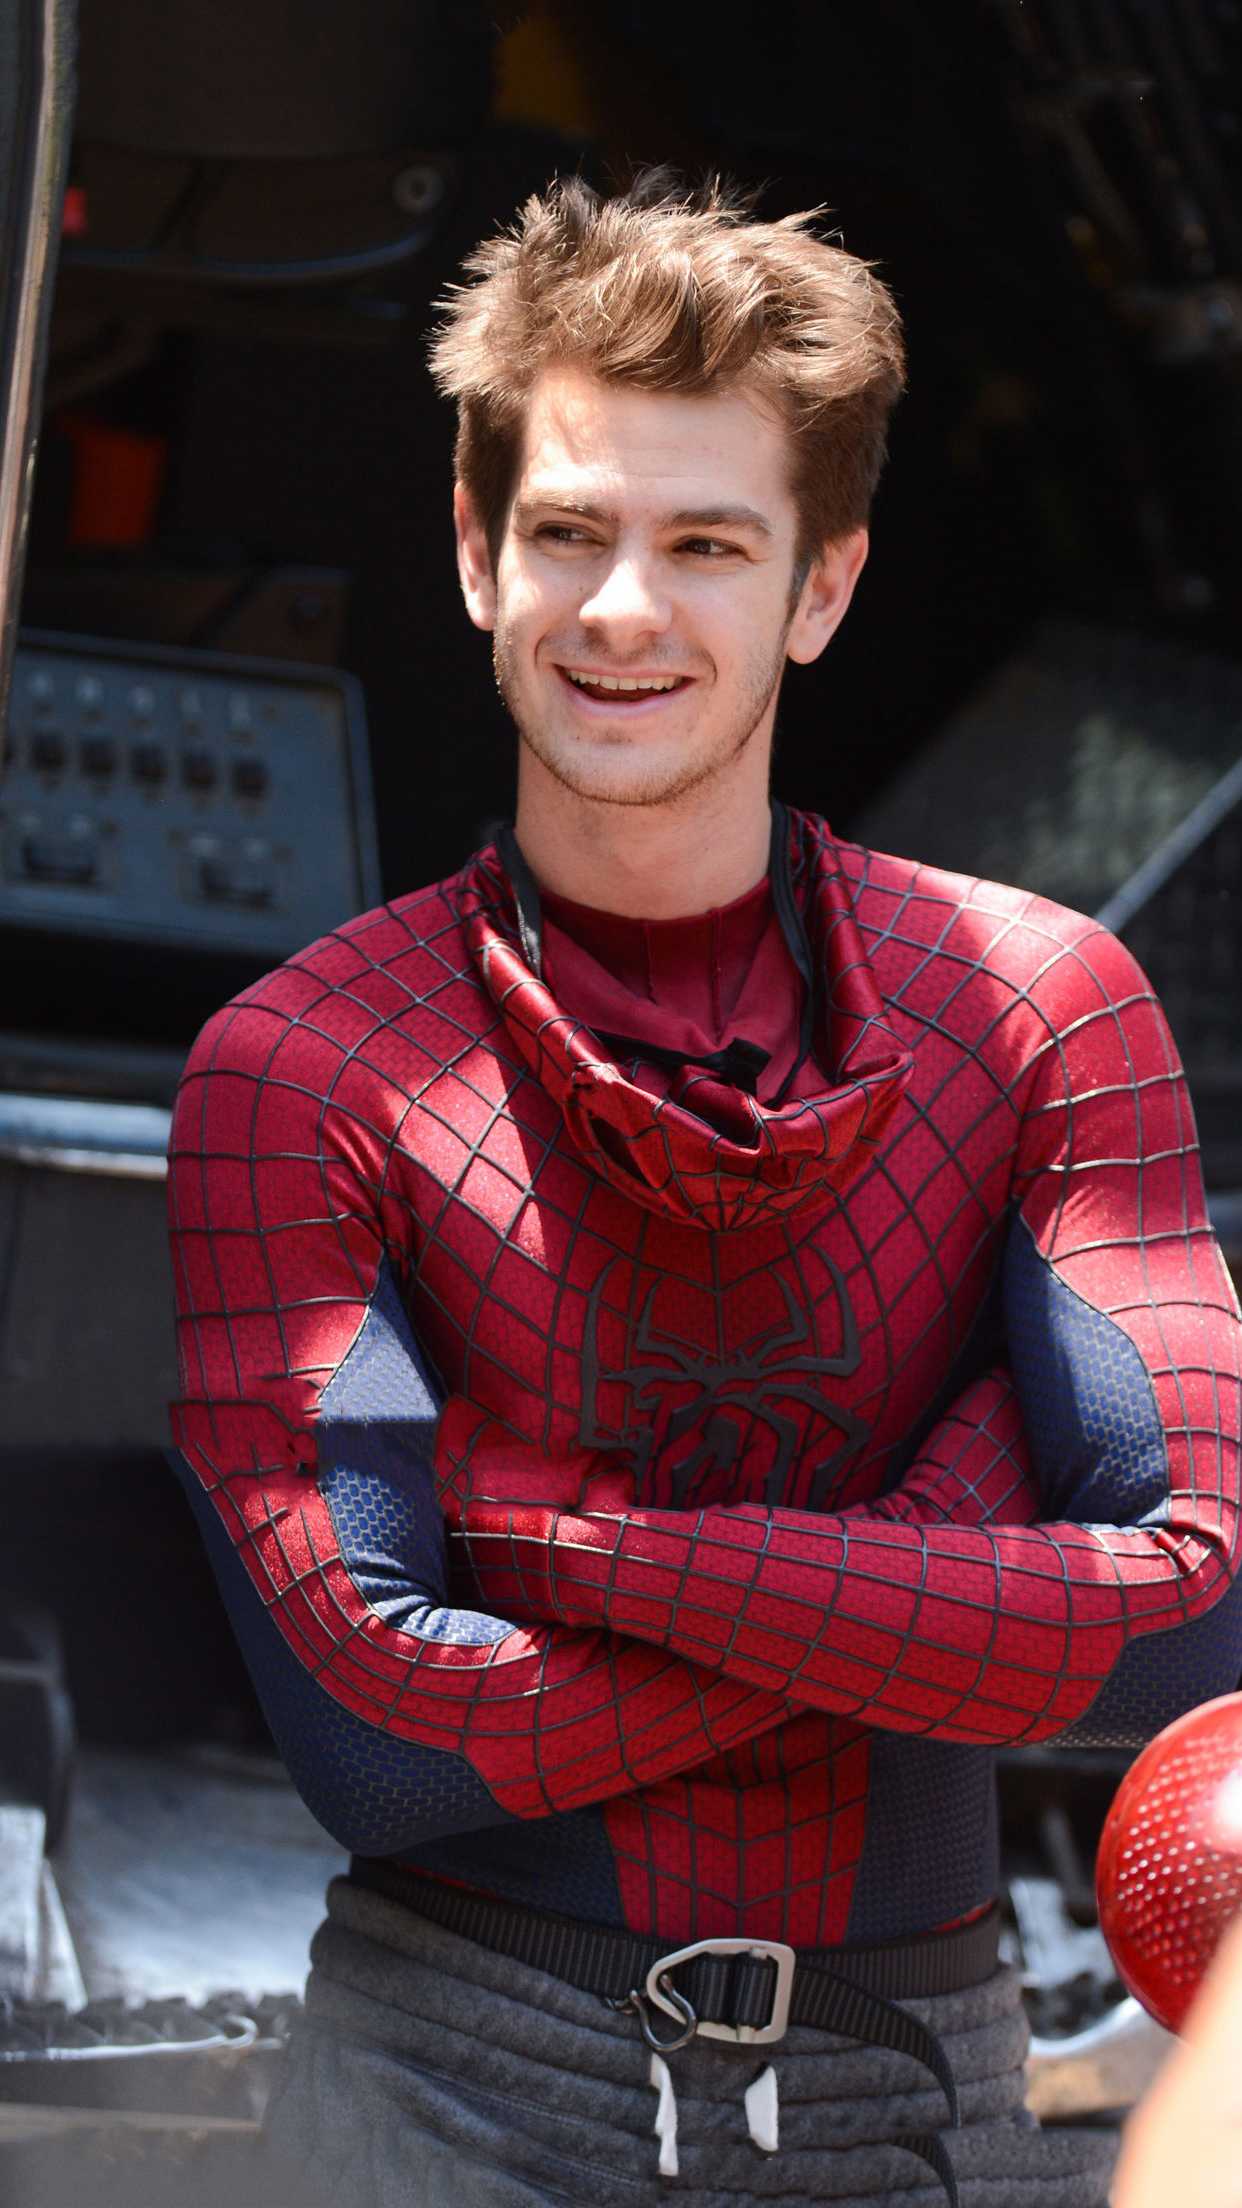 Andrew Garfield - On the set of 'The Amazing Spider-Man 2' in New York City - Andrew Garfield